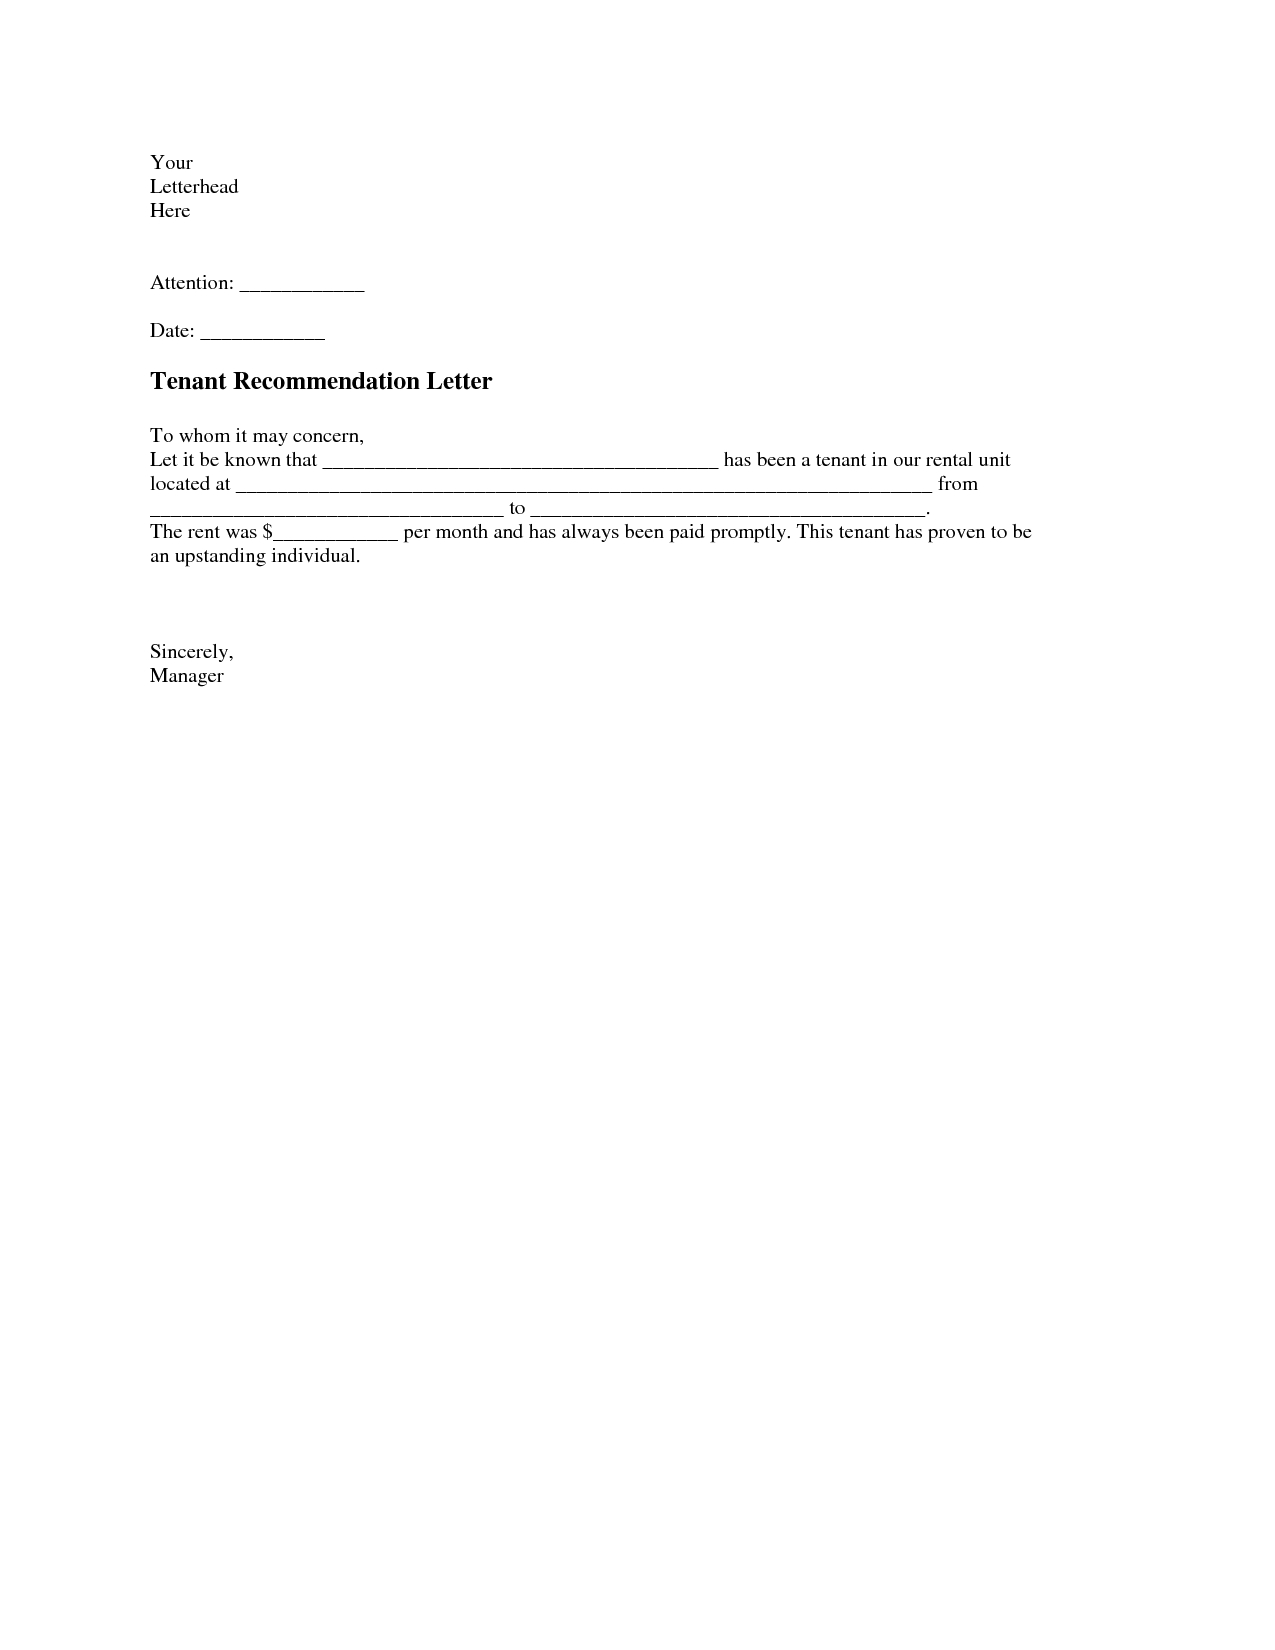 Letter Of Recommendation For Tenant From Employer Enom for size 1275 X 1650